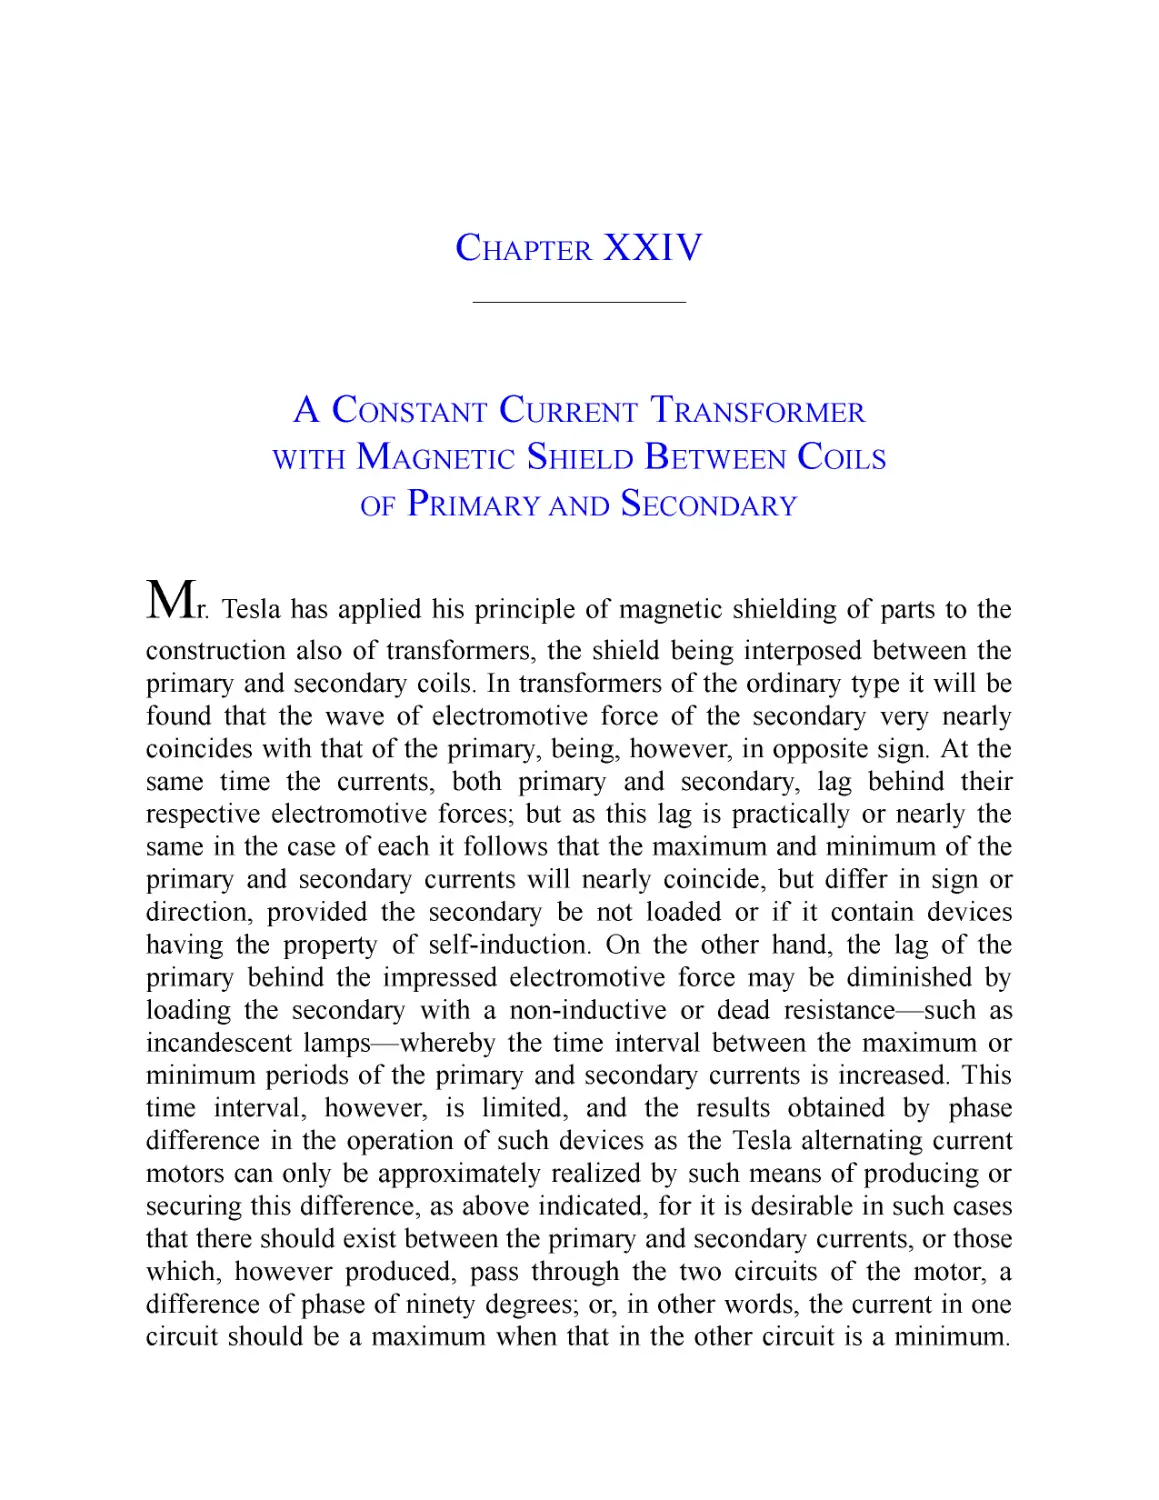 ﻿Chapter XXIV: A Constant Current Transformer with Magnetic Shield Between Coils of Primary and Secondar